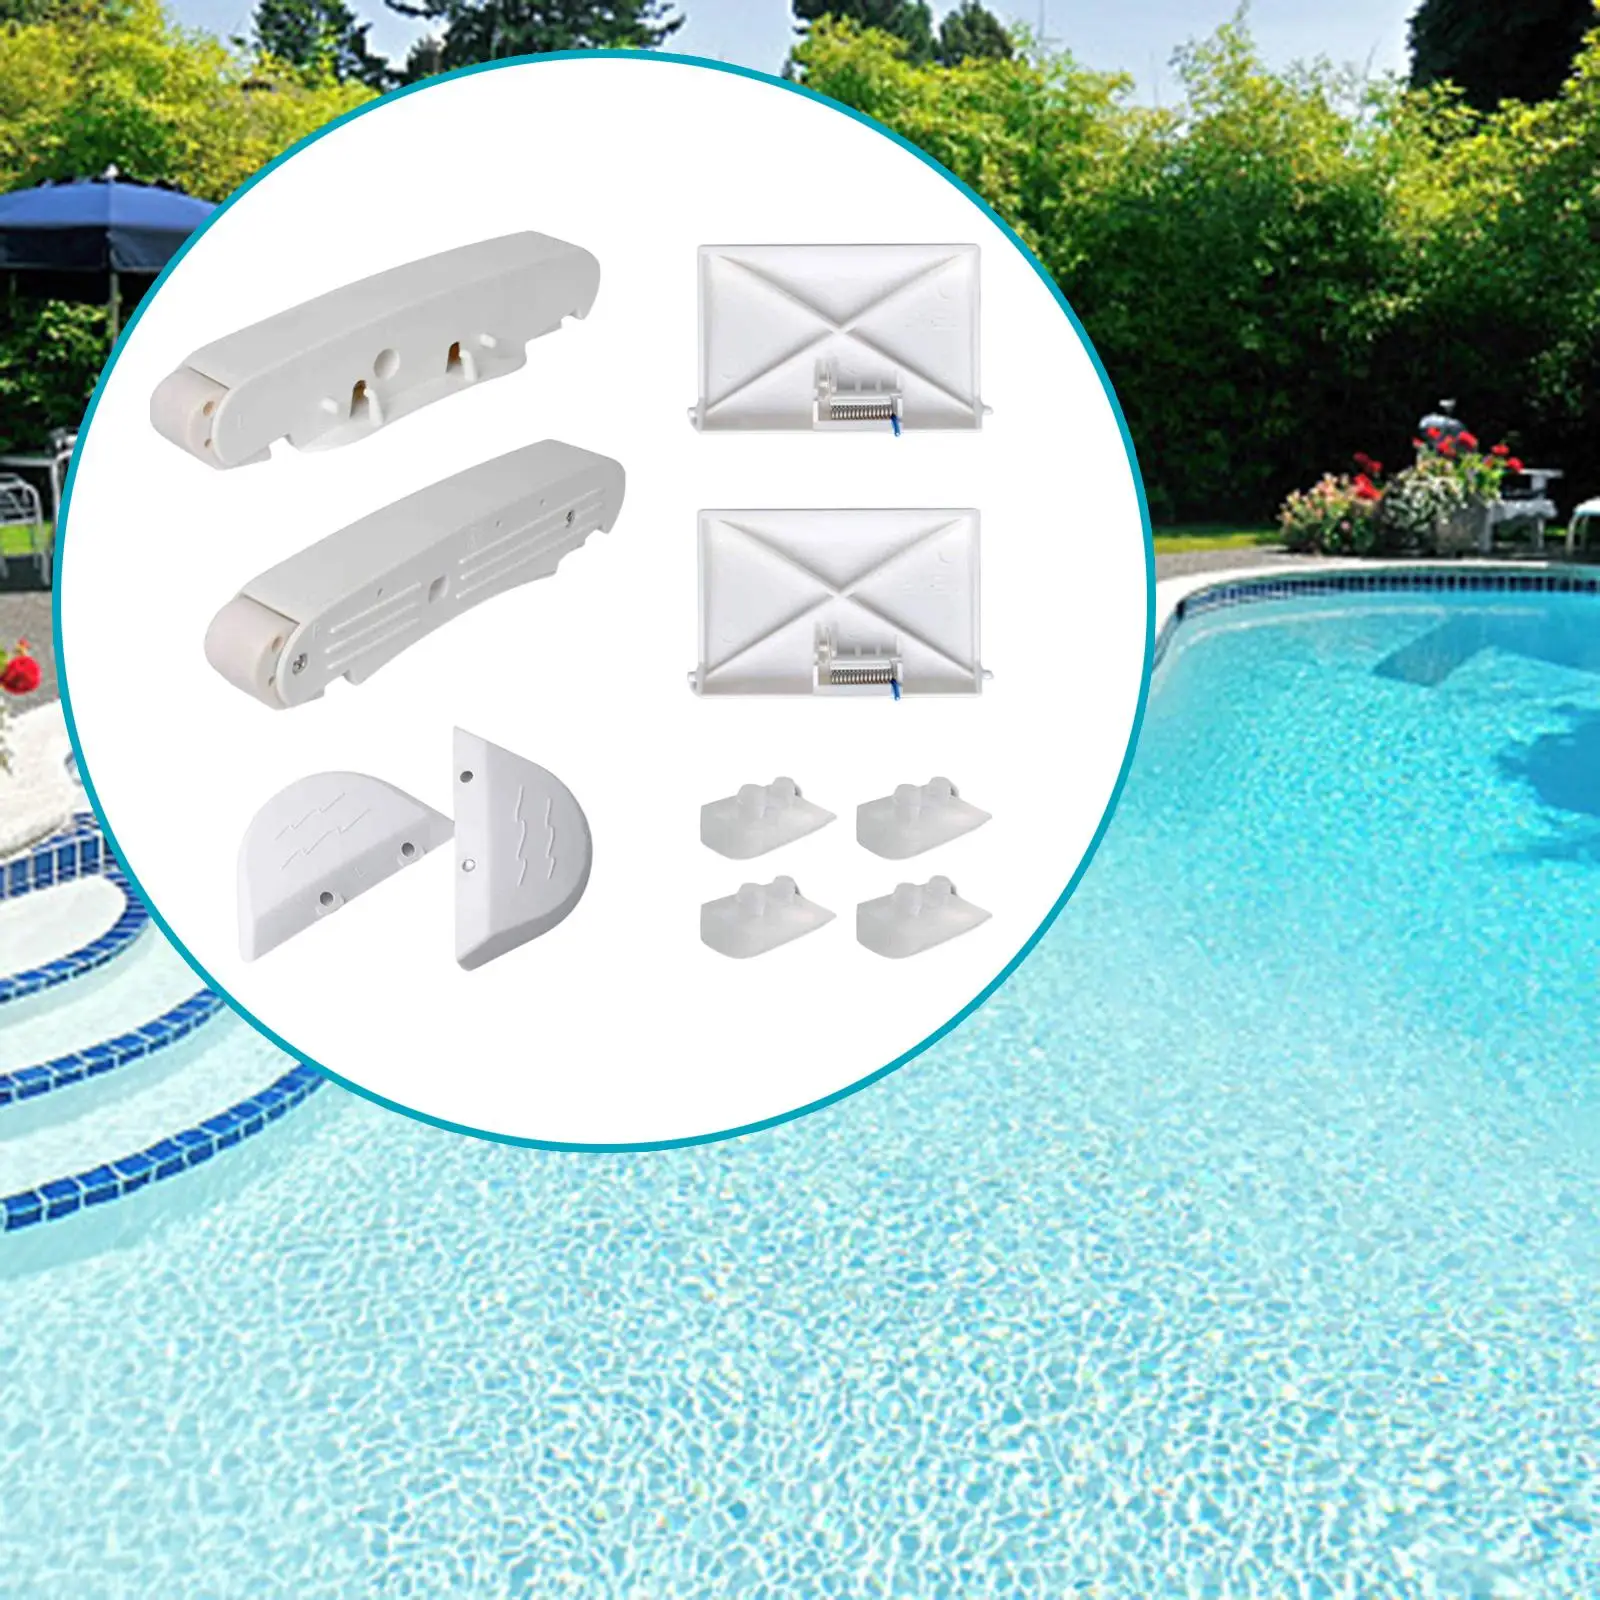 10Pcs Pool Cleaner Pod Swing Set Indoor Lightweight Pool Cleaning Equipment